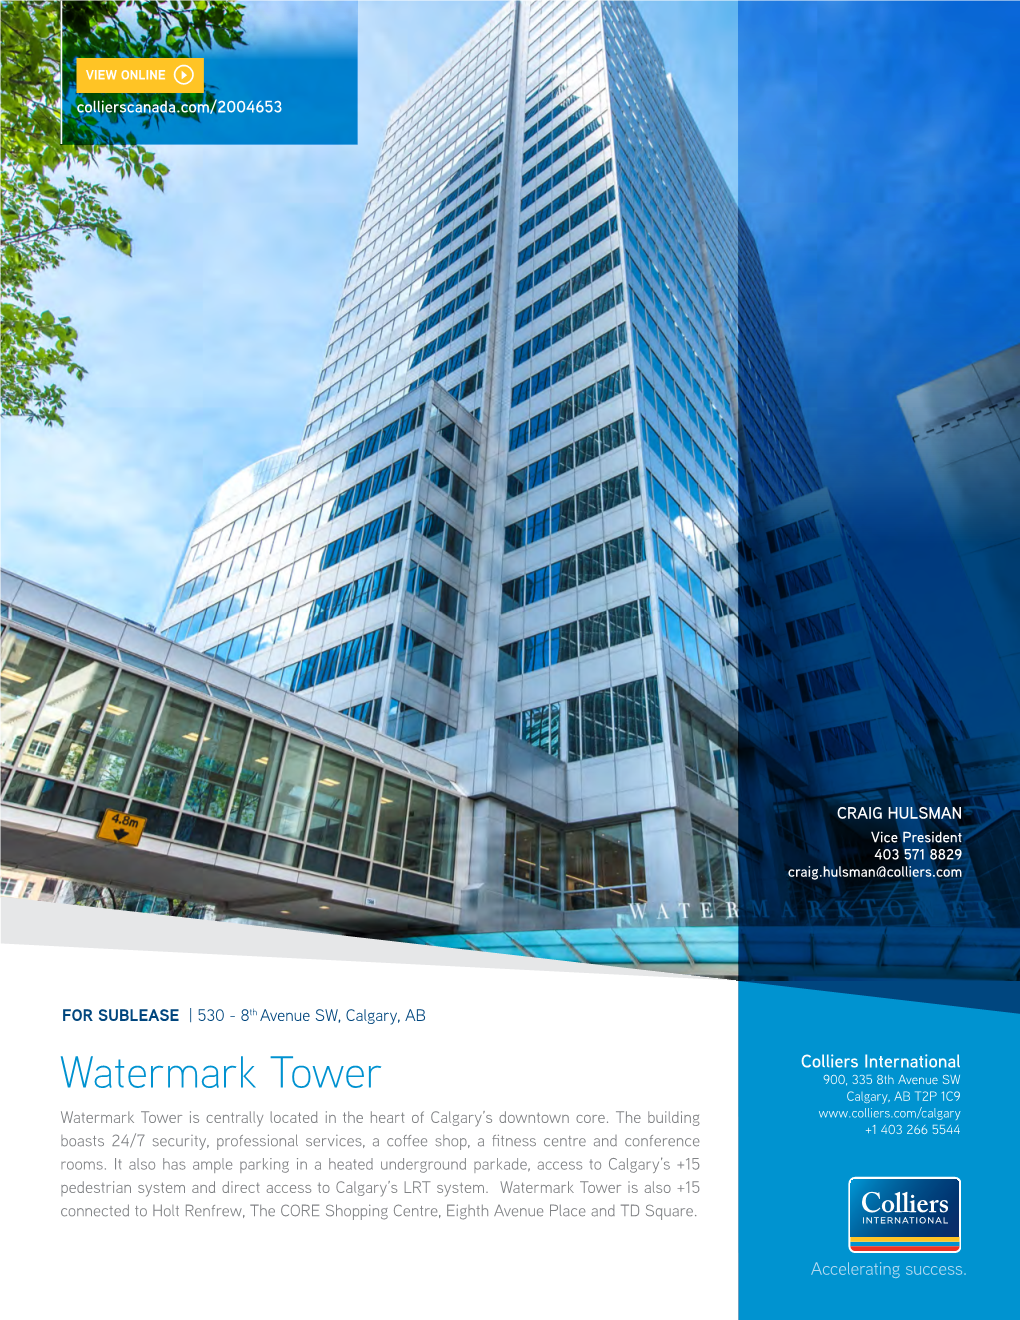 Watermark Tower 900, 335 8Th Avenue SW Calgary, AB T2P 1C9 Watermark Tower Is Centrally Located in the Heart of Calgary’S Downtown Core